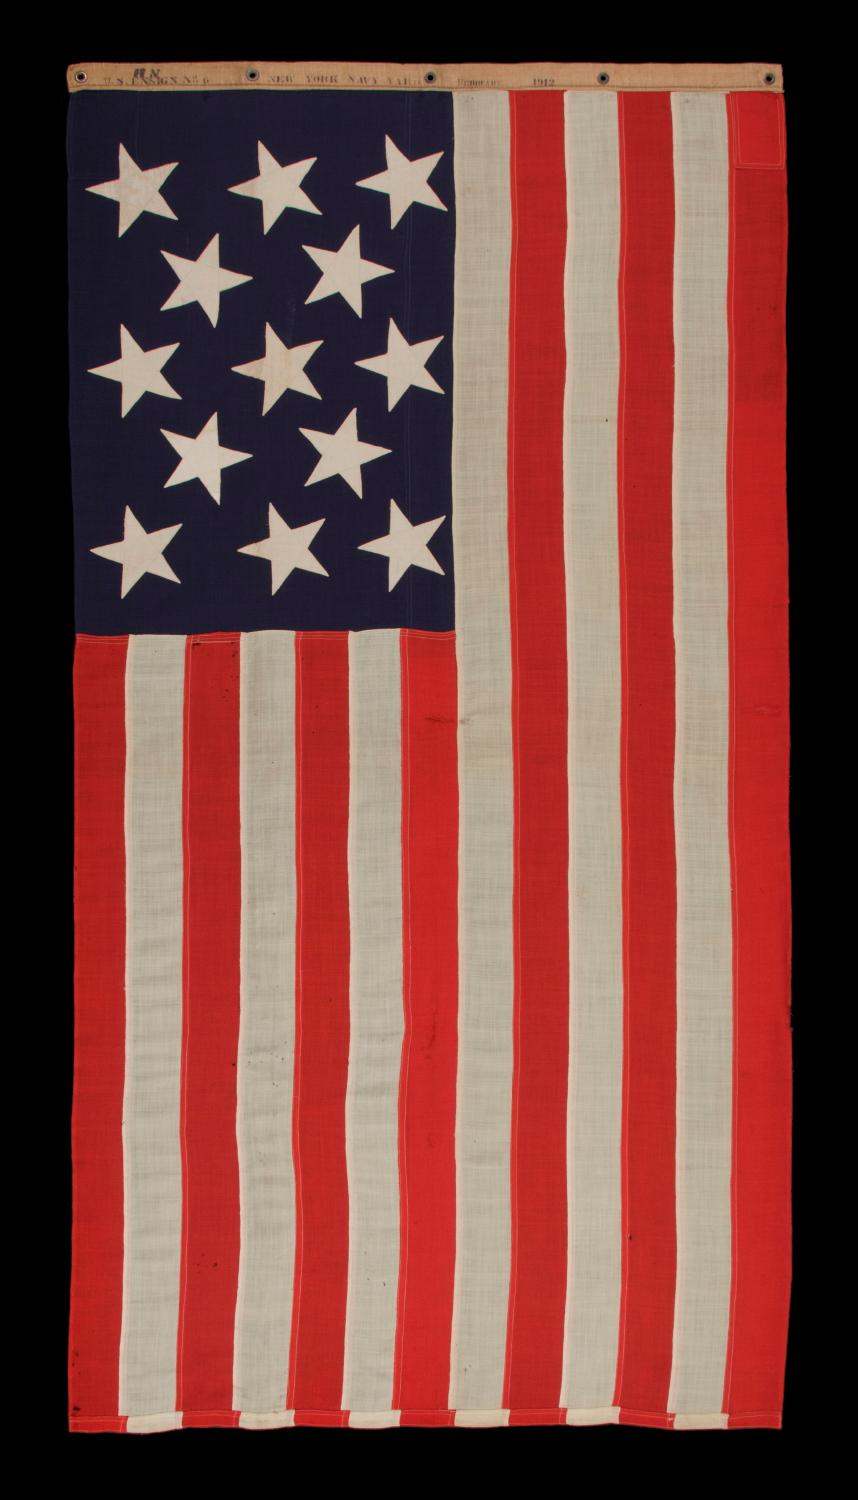 13 STARS IN A 3-2-3-2-3 PATTERN ON AN ANTIQUE AMERICAN FLAG, A UNITED STATES NAVY SMALL BOAT ENSIGN, MADE AT THE BROOKLYN NAVY YARD, NEW YORK, SIGNED & DATED 1912 

13 star American national flag of the type used by the U.S. Navy on small boats